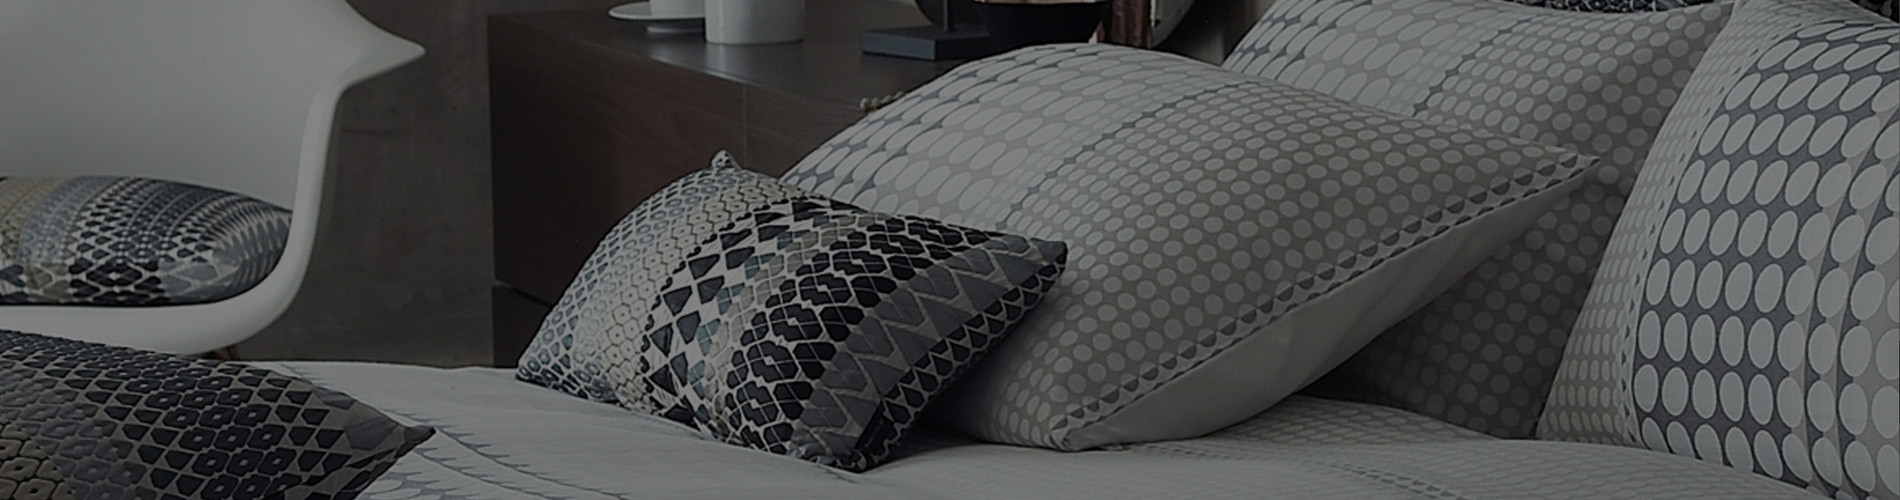 Sophisticated Bed Linen To Freshen Up Any Room | Viva Lagoon